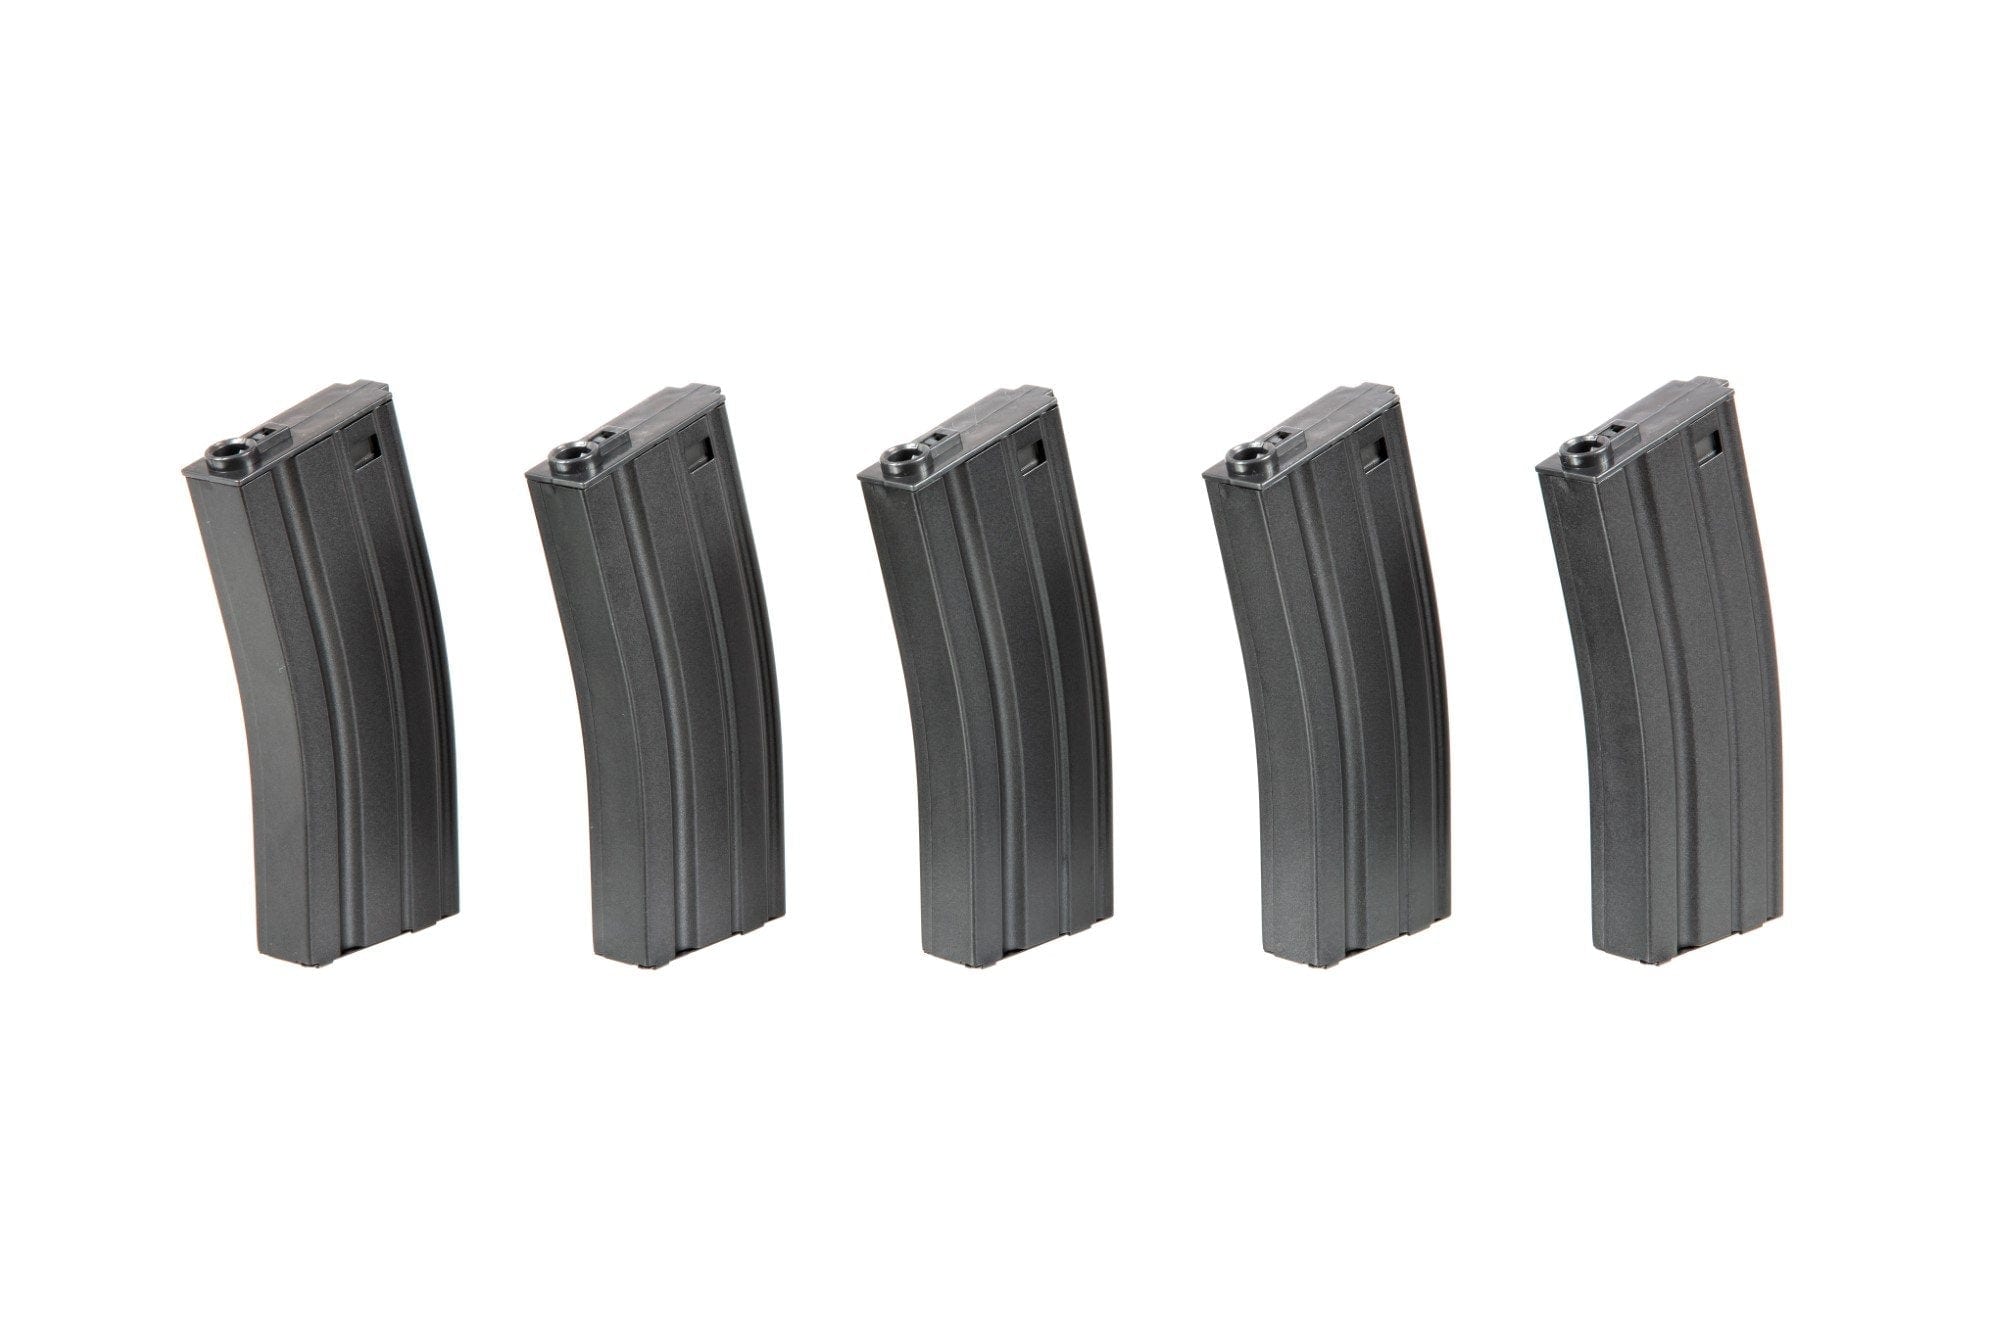 Set of 5 Mid-Cap 100 BB Magazines for M4 / M16 - Gray by Specna Arms on Airsoft Mania Europe